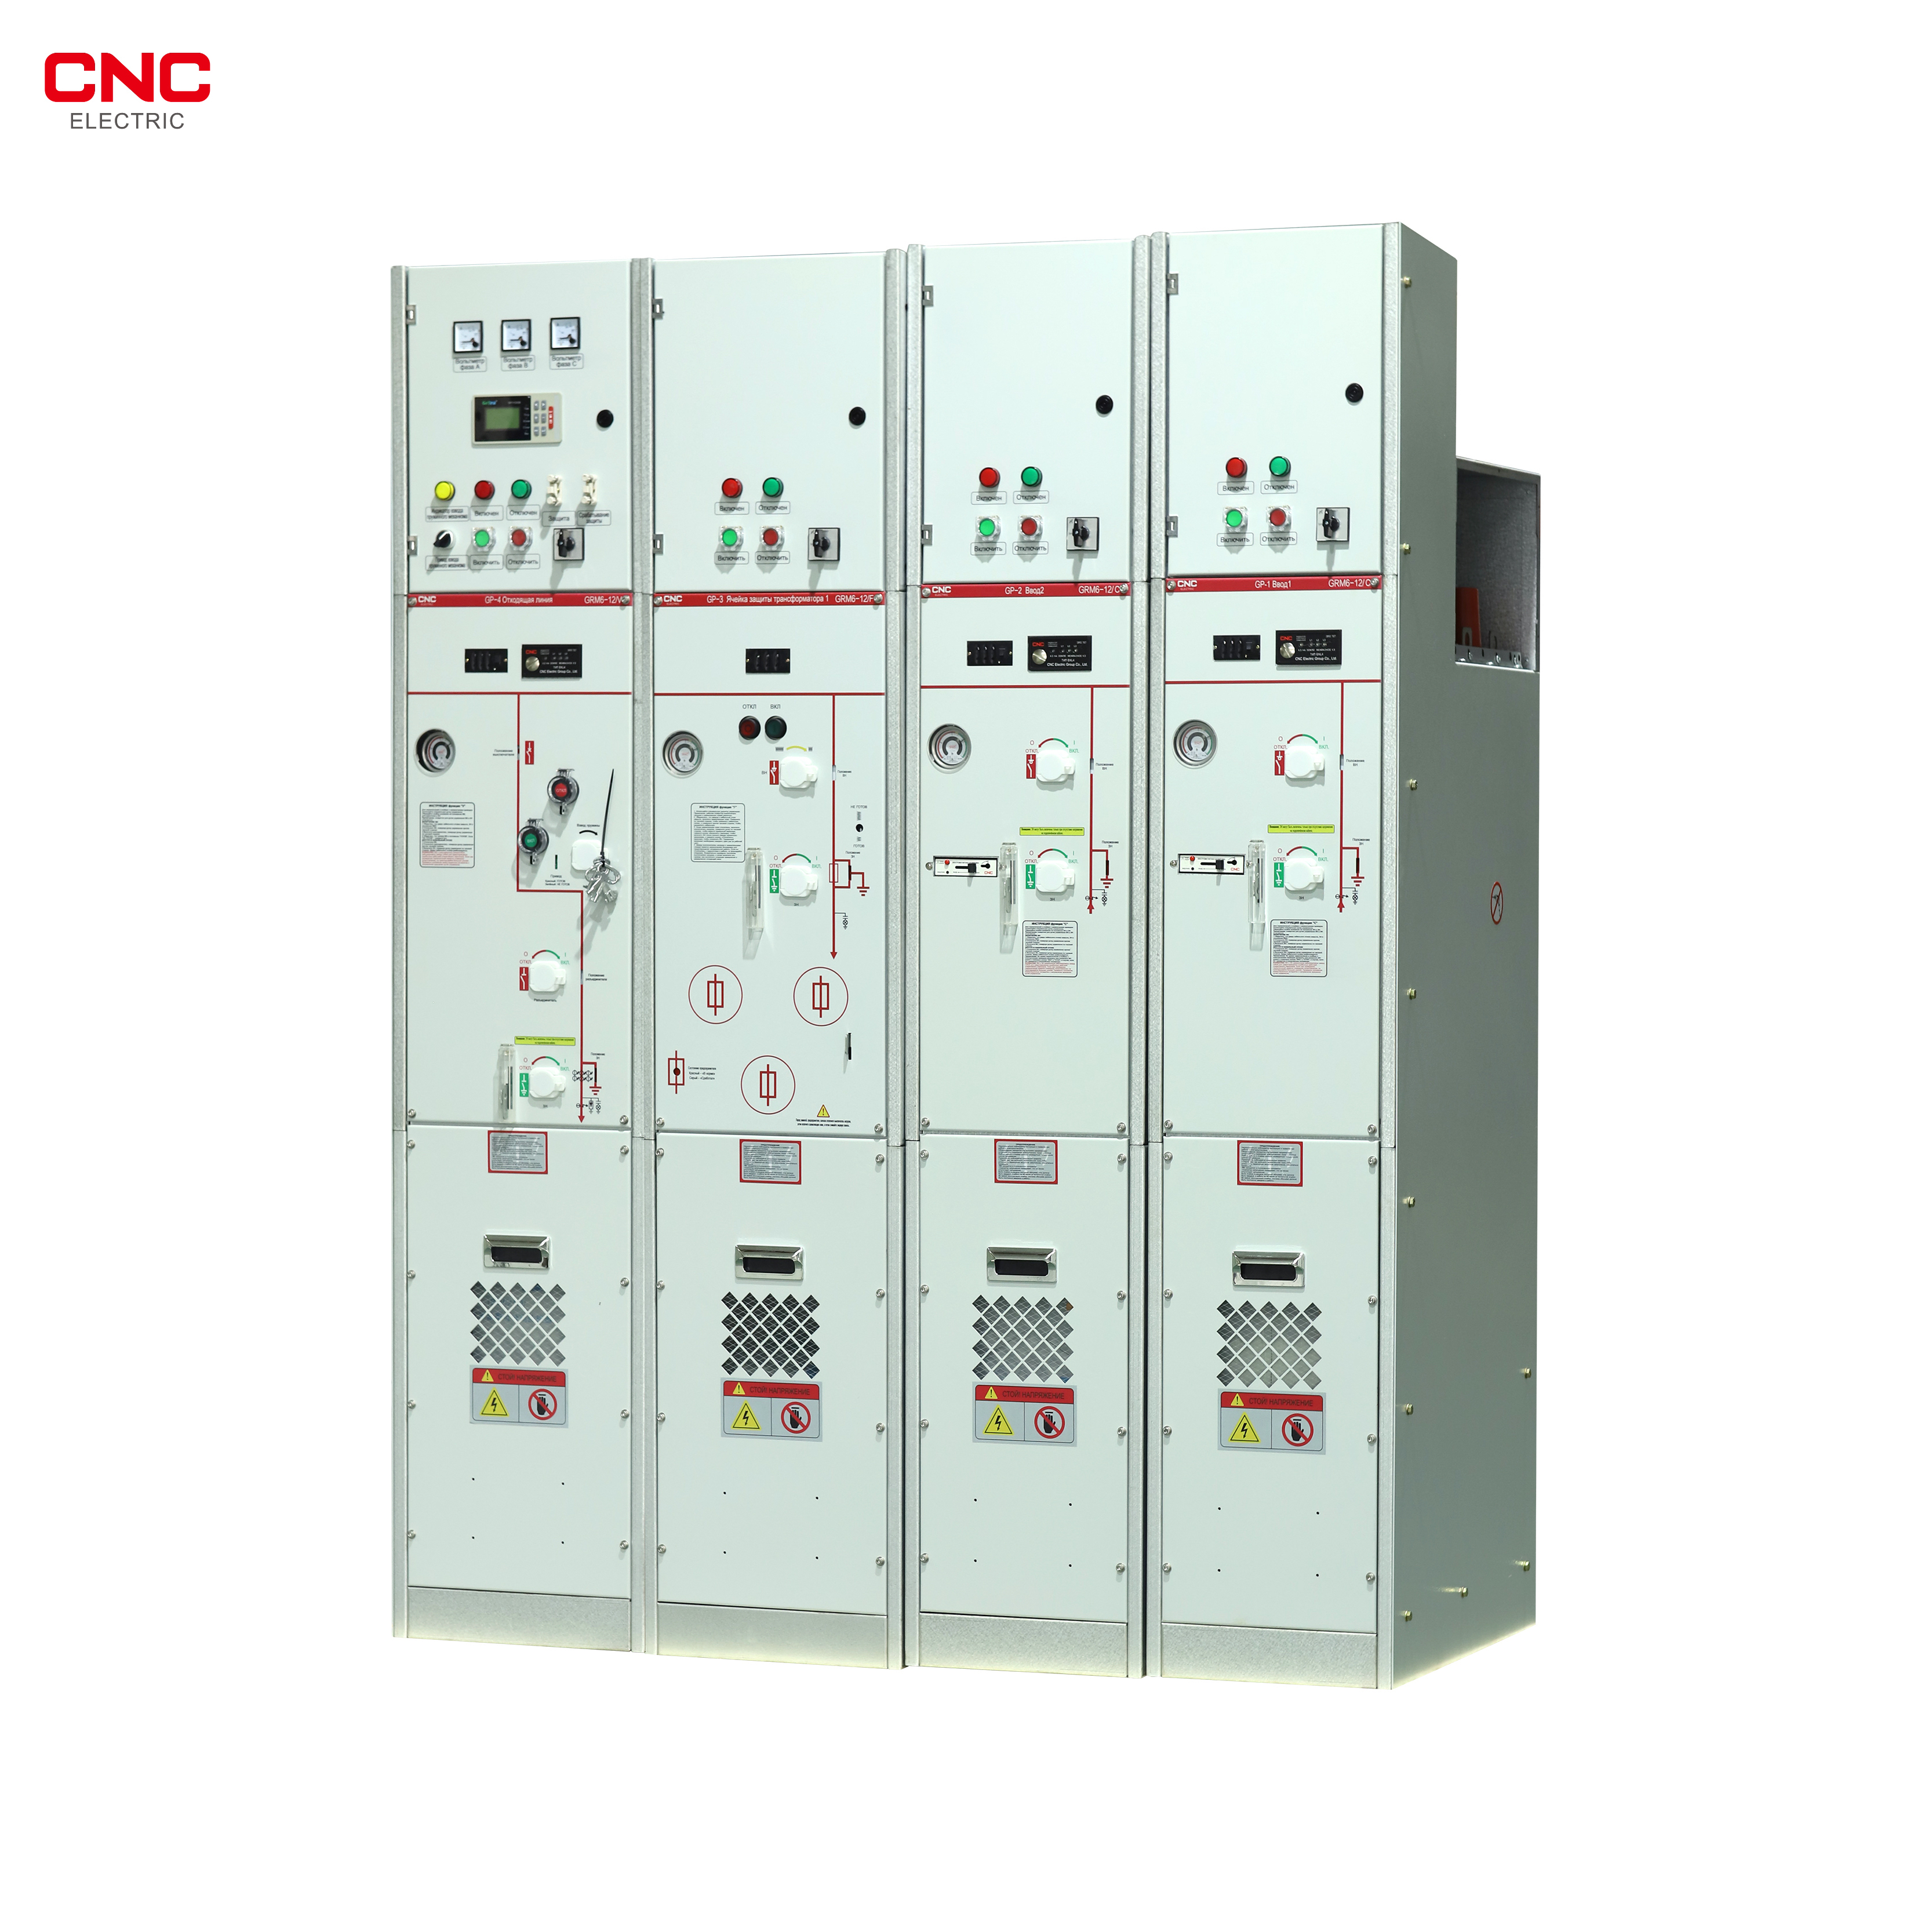 YRM6 fully insulated fully enclosed compact switchgear